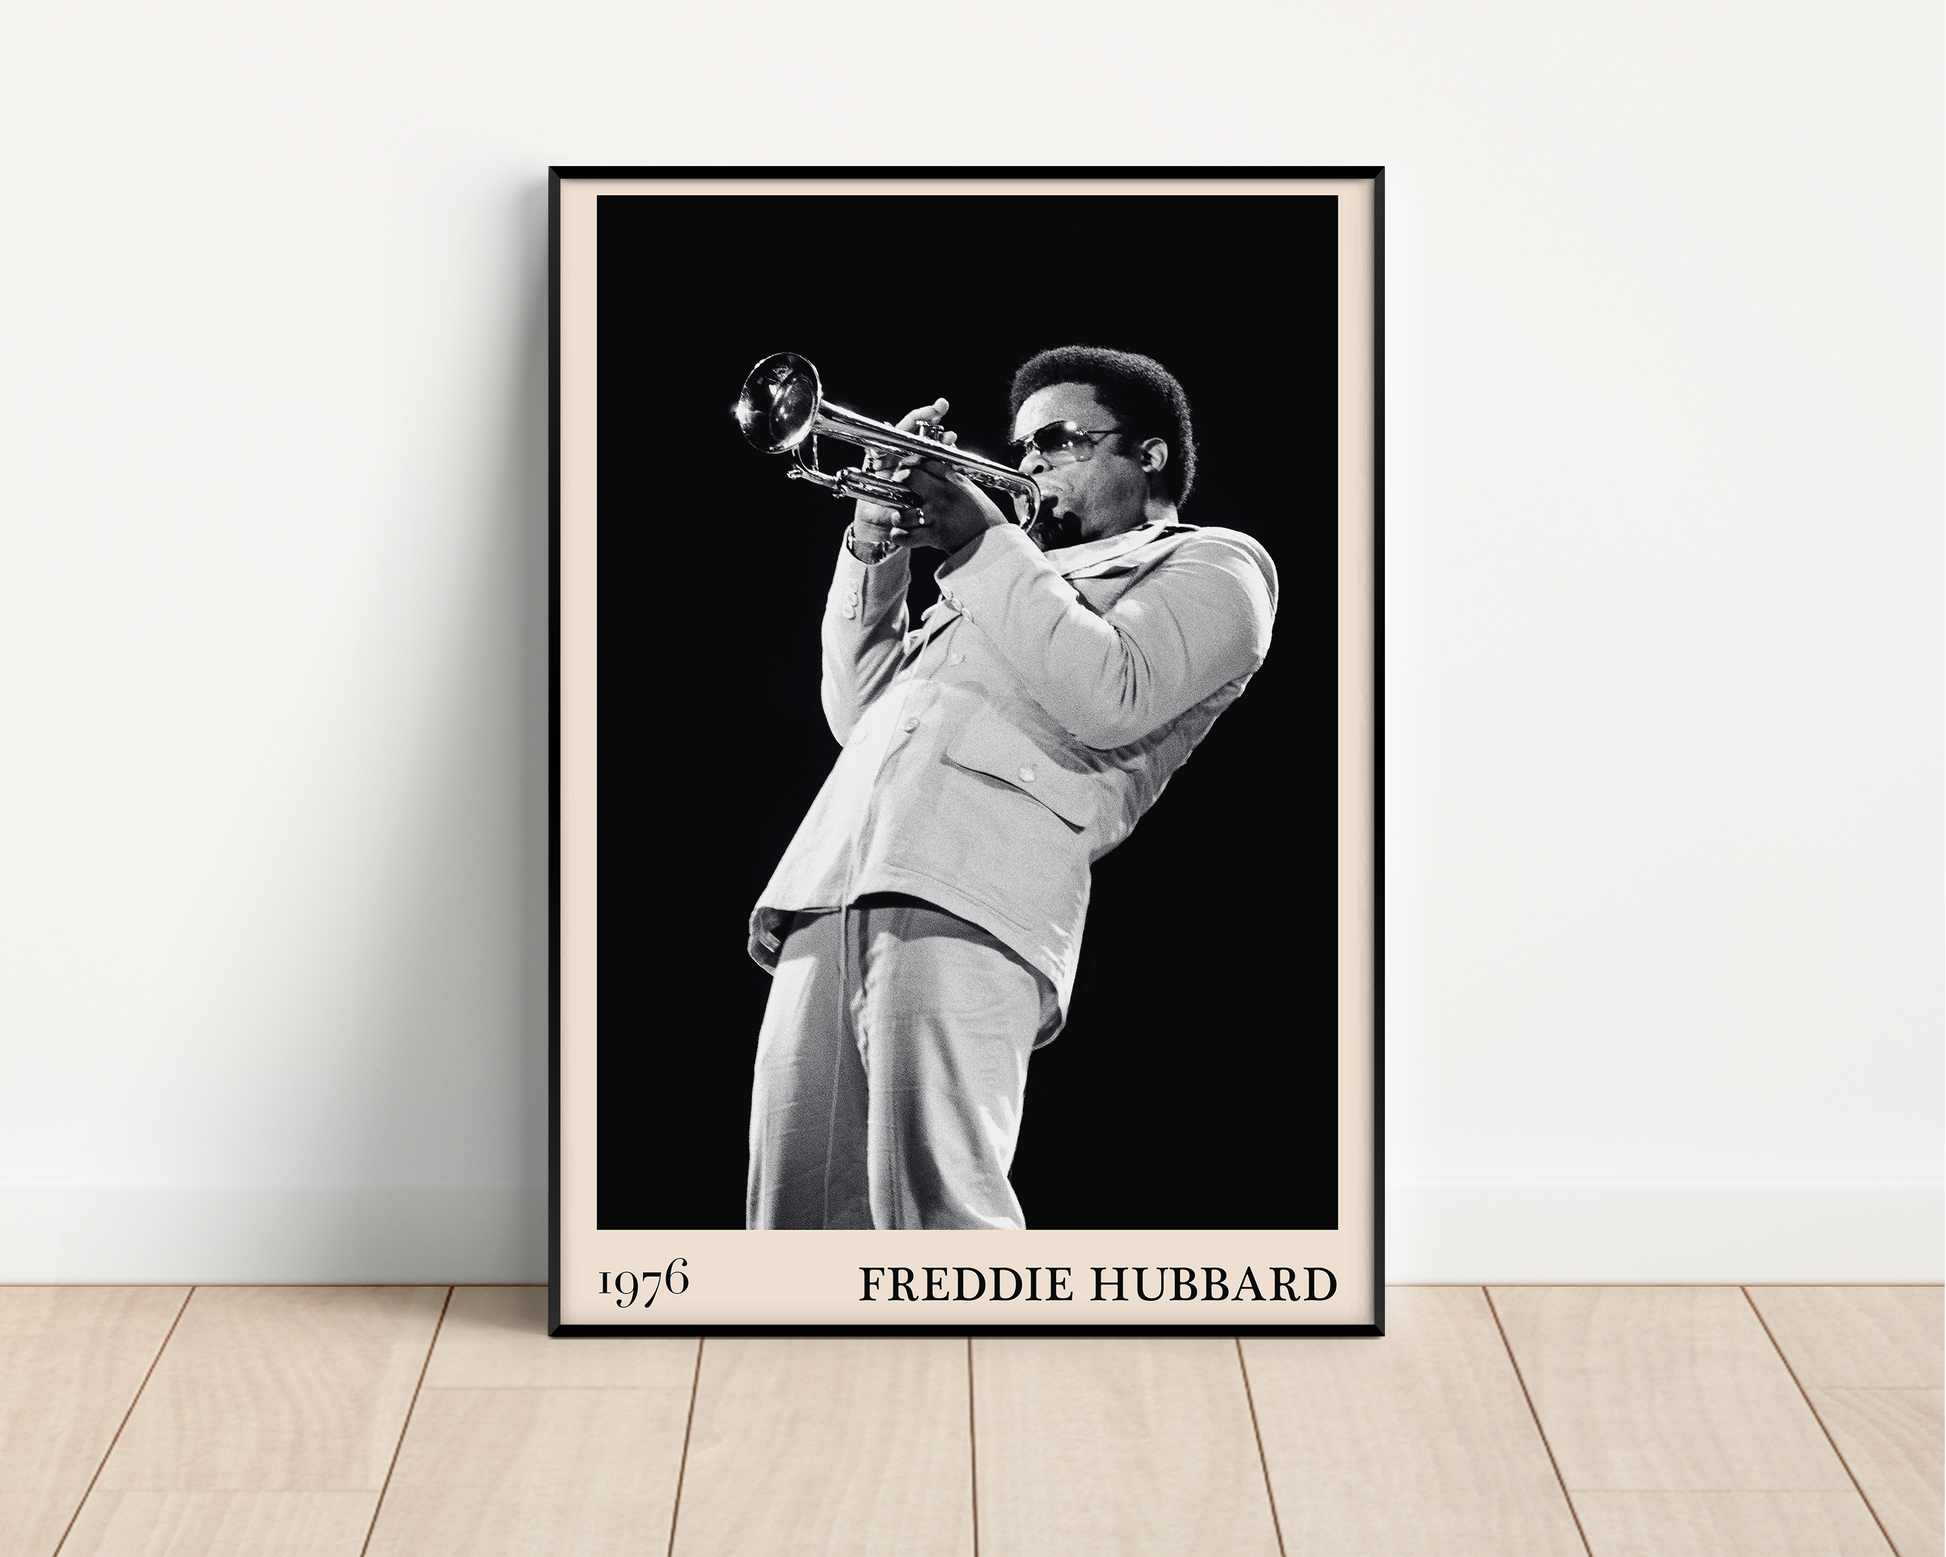 1976 photograph of Freddie Hubbard taken by Thomas Marcello. Picture crafted into a black framed poster, with an off-white border. Poster is propped against a white wall